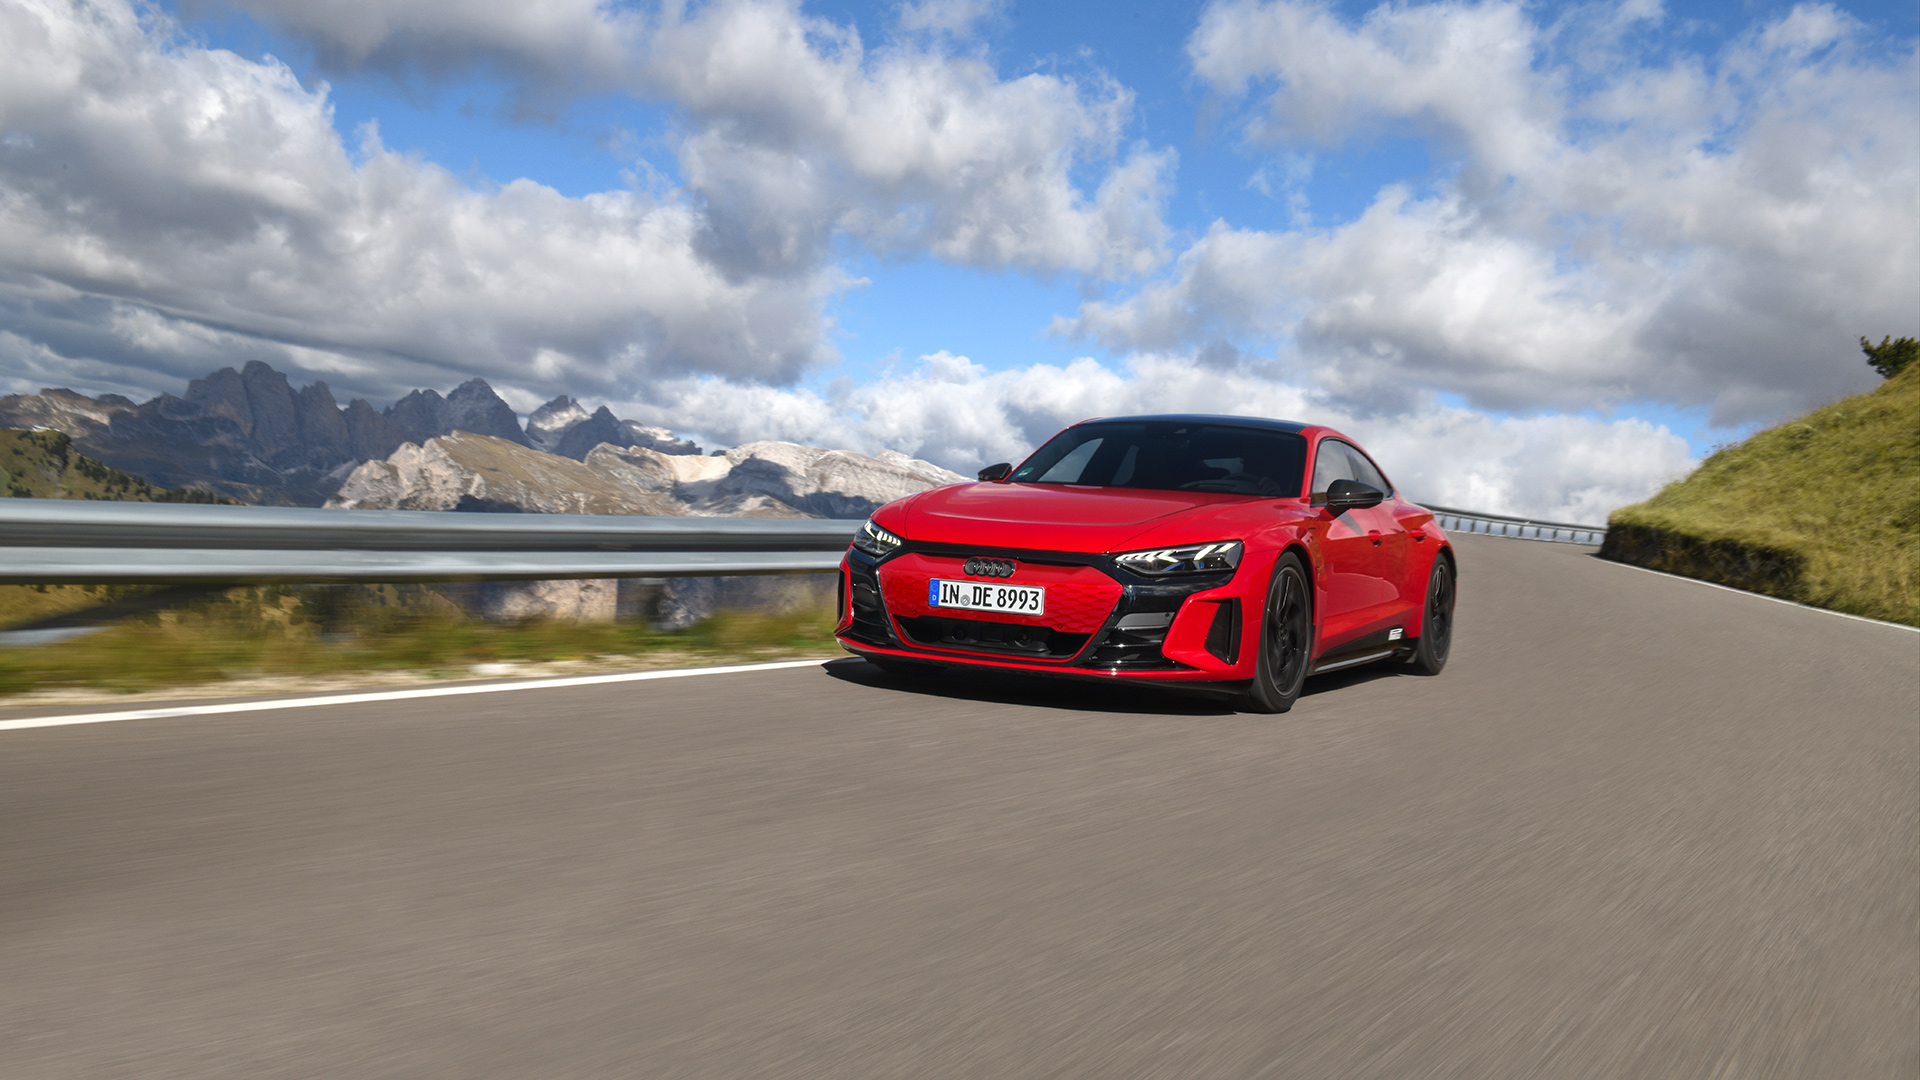 Red Audi R8 Spyder V10 performance quattro  (rear view) driving throug the mountains in great weather